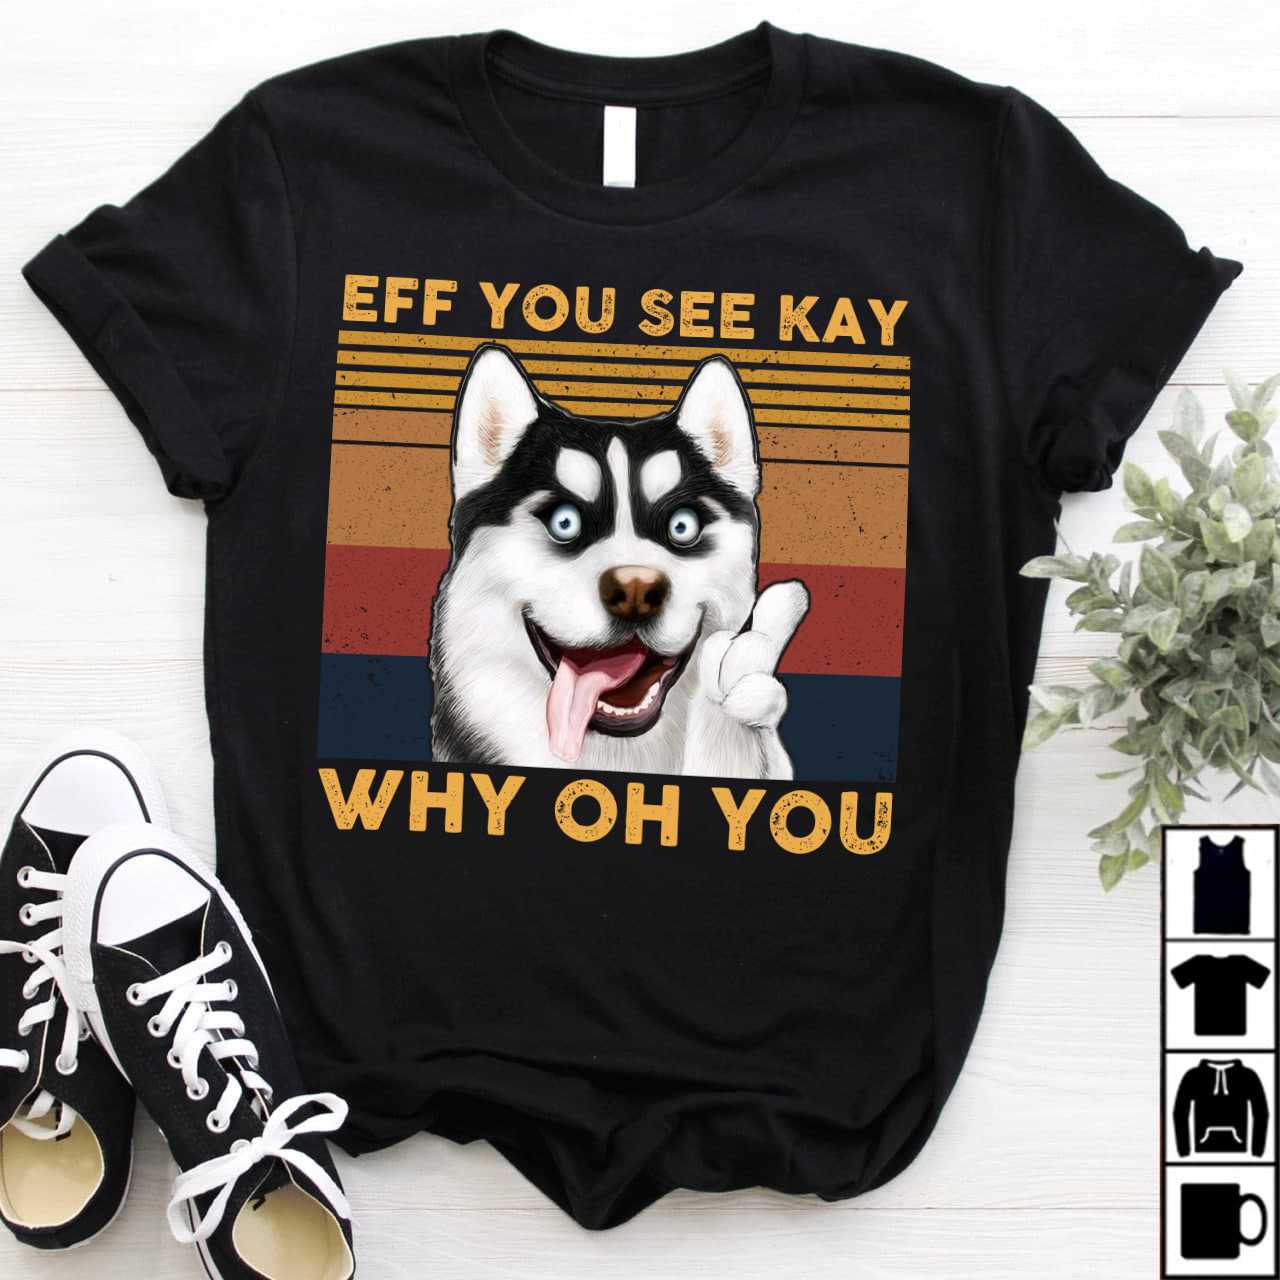 Eff you see kay, why oh you - Funny Husky graphic T-shirt